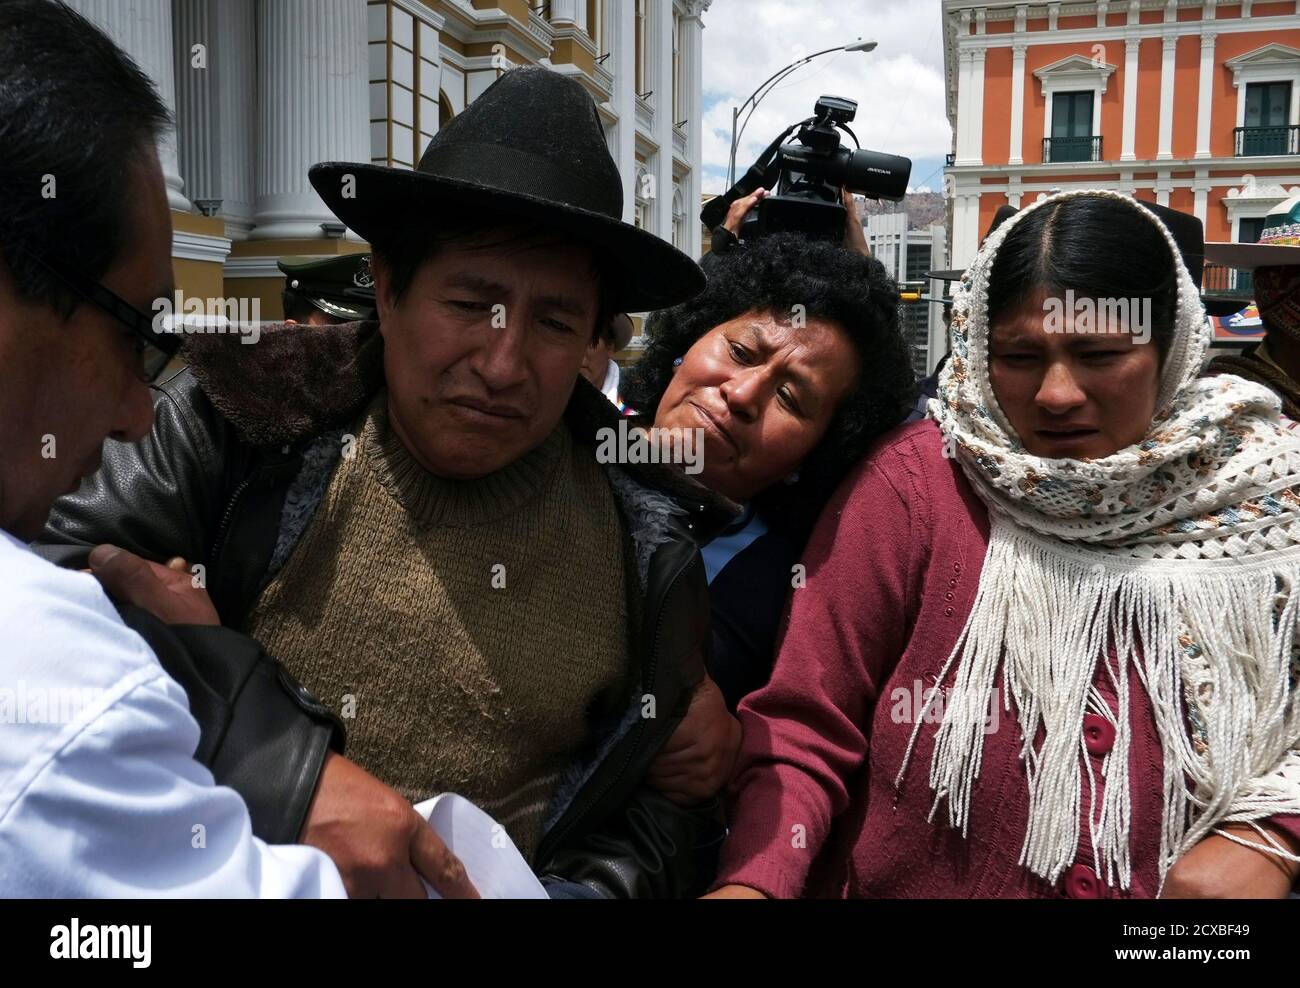 Indigenous leader Rafael Quispe (2nd L), a former leader of Bolivia's CONAMAQ (National Council of Ayllus and Markas of Qullasuyu), and his wife Rocio (R) leave the congress building, after ending their hunger strike protest in La Paz, October 7, 2013. The CONAMAQ, a confederation to politically represent certain indigenous communities, were protesting against the results of the last census, which caused the geographical region they represent to lose congressional seats for the next legislative elections in 2014, according to local media. The hunger strikers called off their protest on Monday, Stock Photo